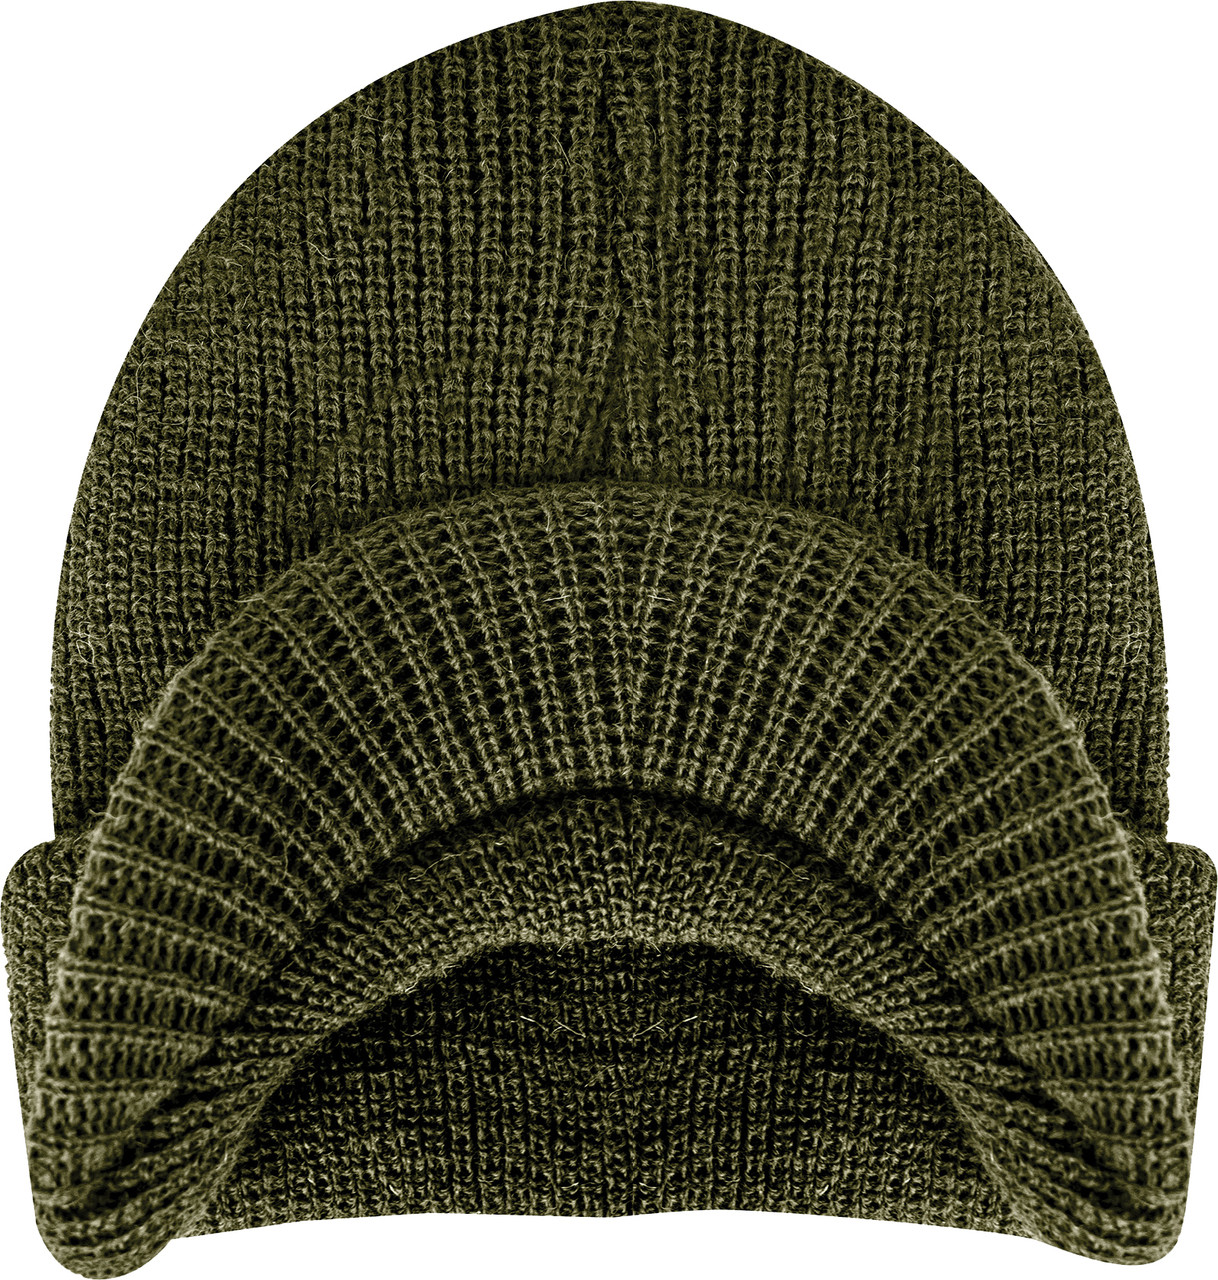 Wool Watch Cap with Brim Universe Visor Beanie Hat Army - with